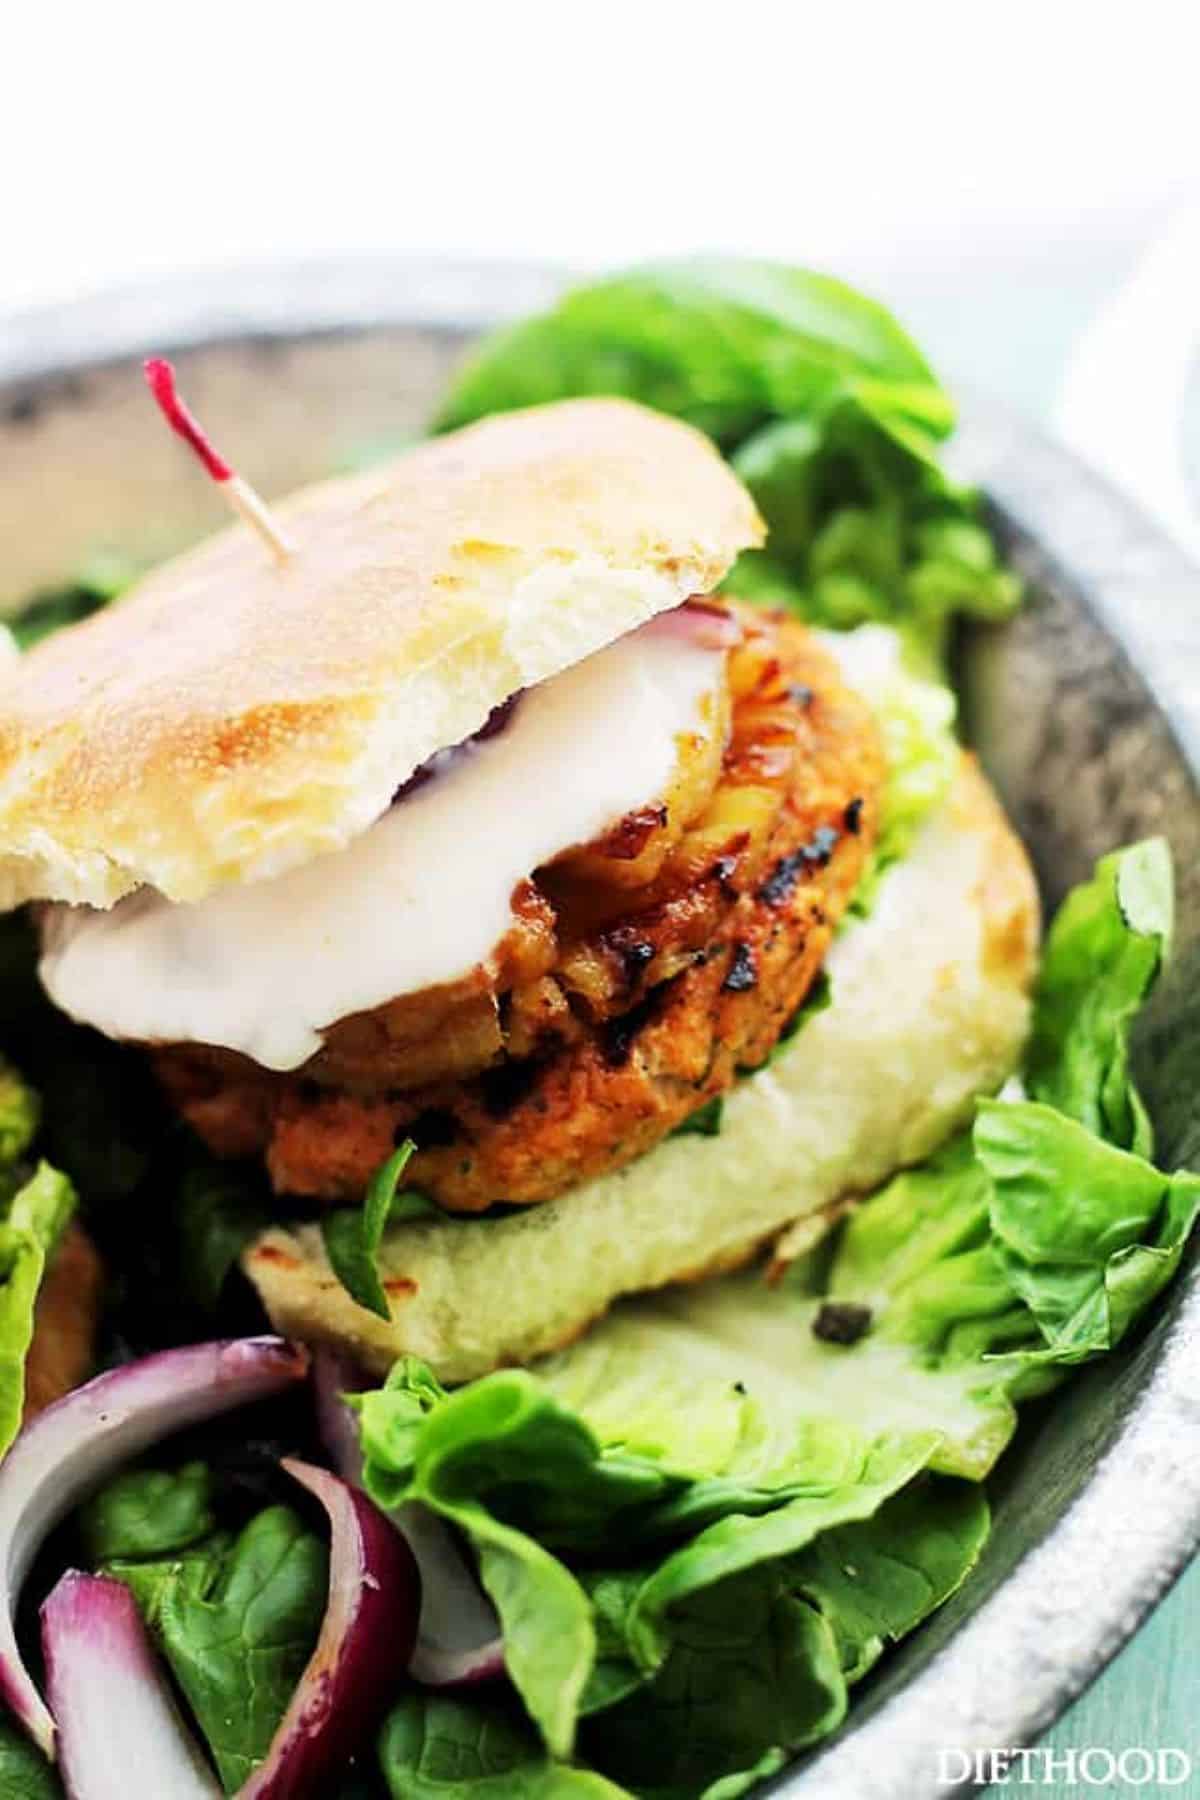 Grilled salmon burger with pineapple, sauce, and toasted bun.